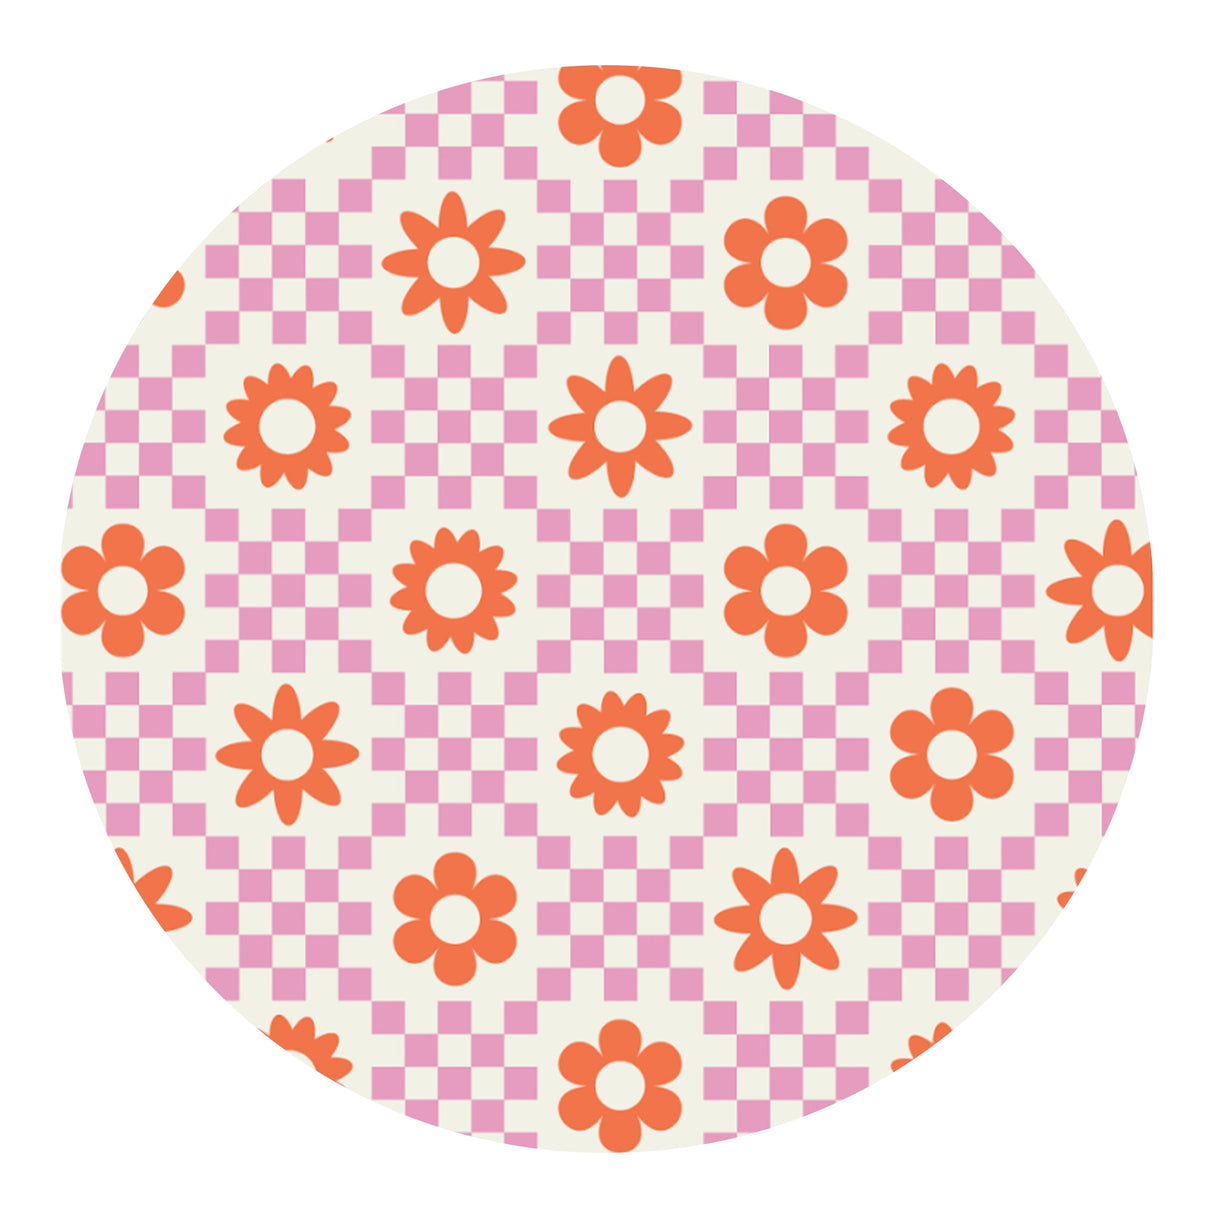 Flowers & Checkers Sublimation Paper Print